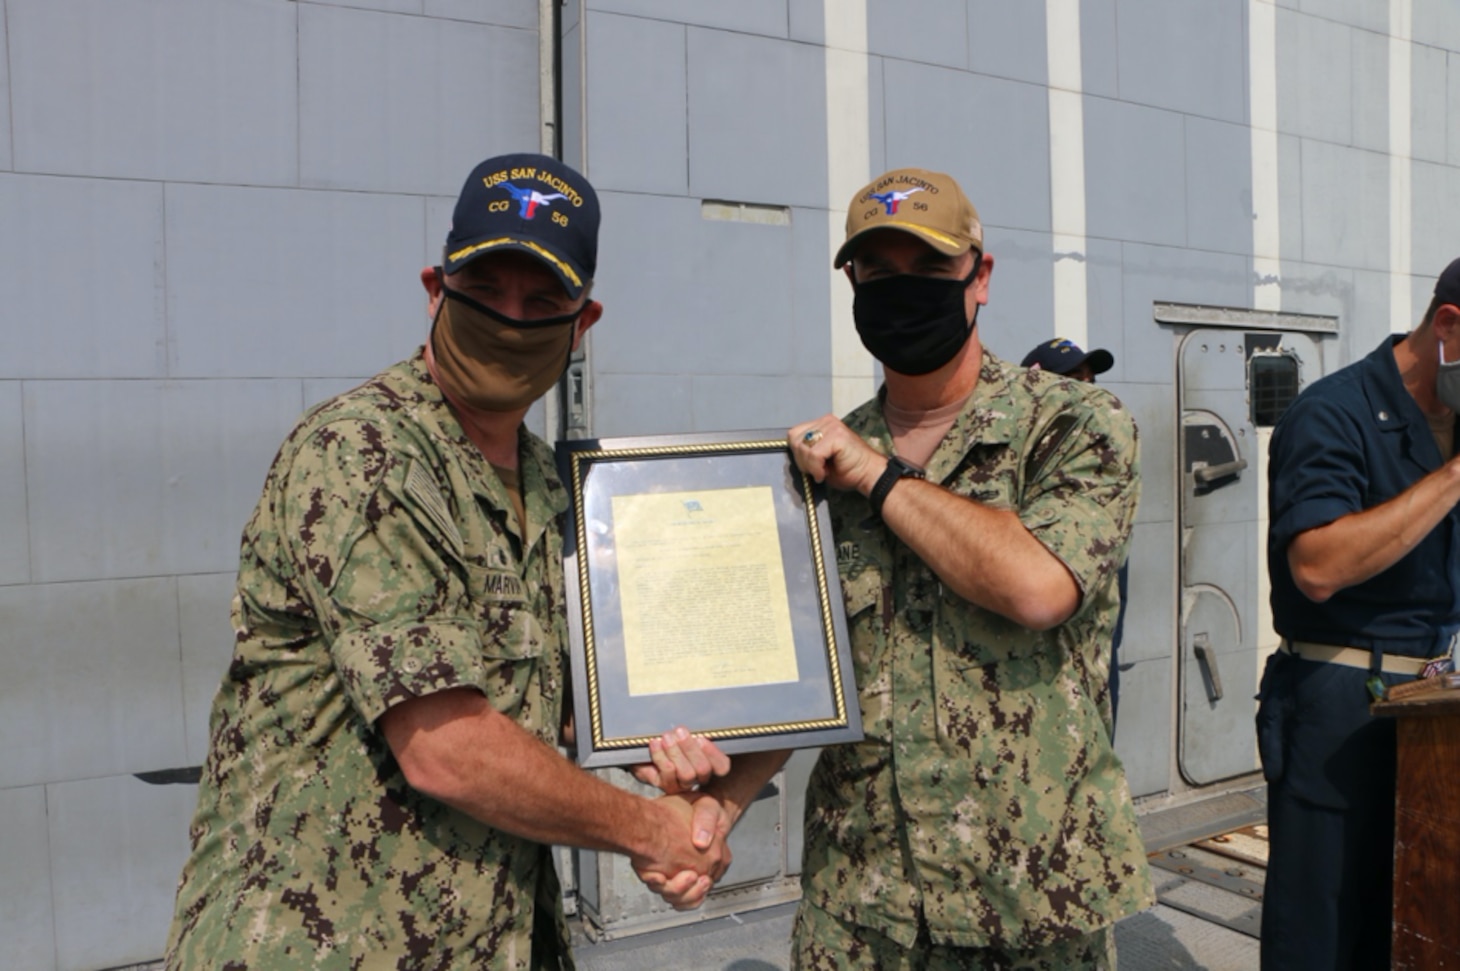 NAVAL STATION NORFOLK (Aug. 2, 2021) – Rear Adm. Brendan McLane, commander, Naval Surface Force Atlantic, presents Capt. Chris Marvin, commanding officer of the guided-missile cruiser USS San Jacinto (CG 56), with the Navy Unit Commendation. The crew of San Jacinto was awarded for their leadership and hard work in support of the Dwight D. Eisenhower Carrier Strike Group during their 2020 deployment, which lasted 206 days with no port visits. (U.S. Navy photo by Boatswain’s Mate 3rd Class Danielle Bordine/Released)